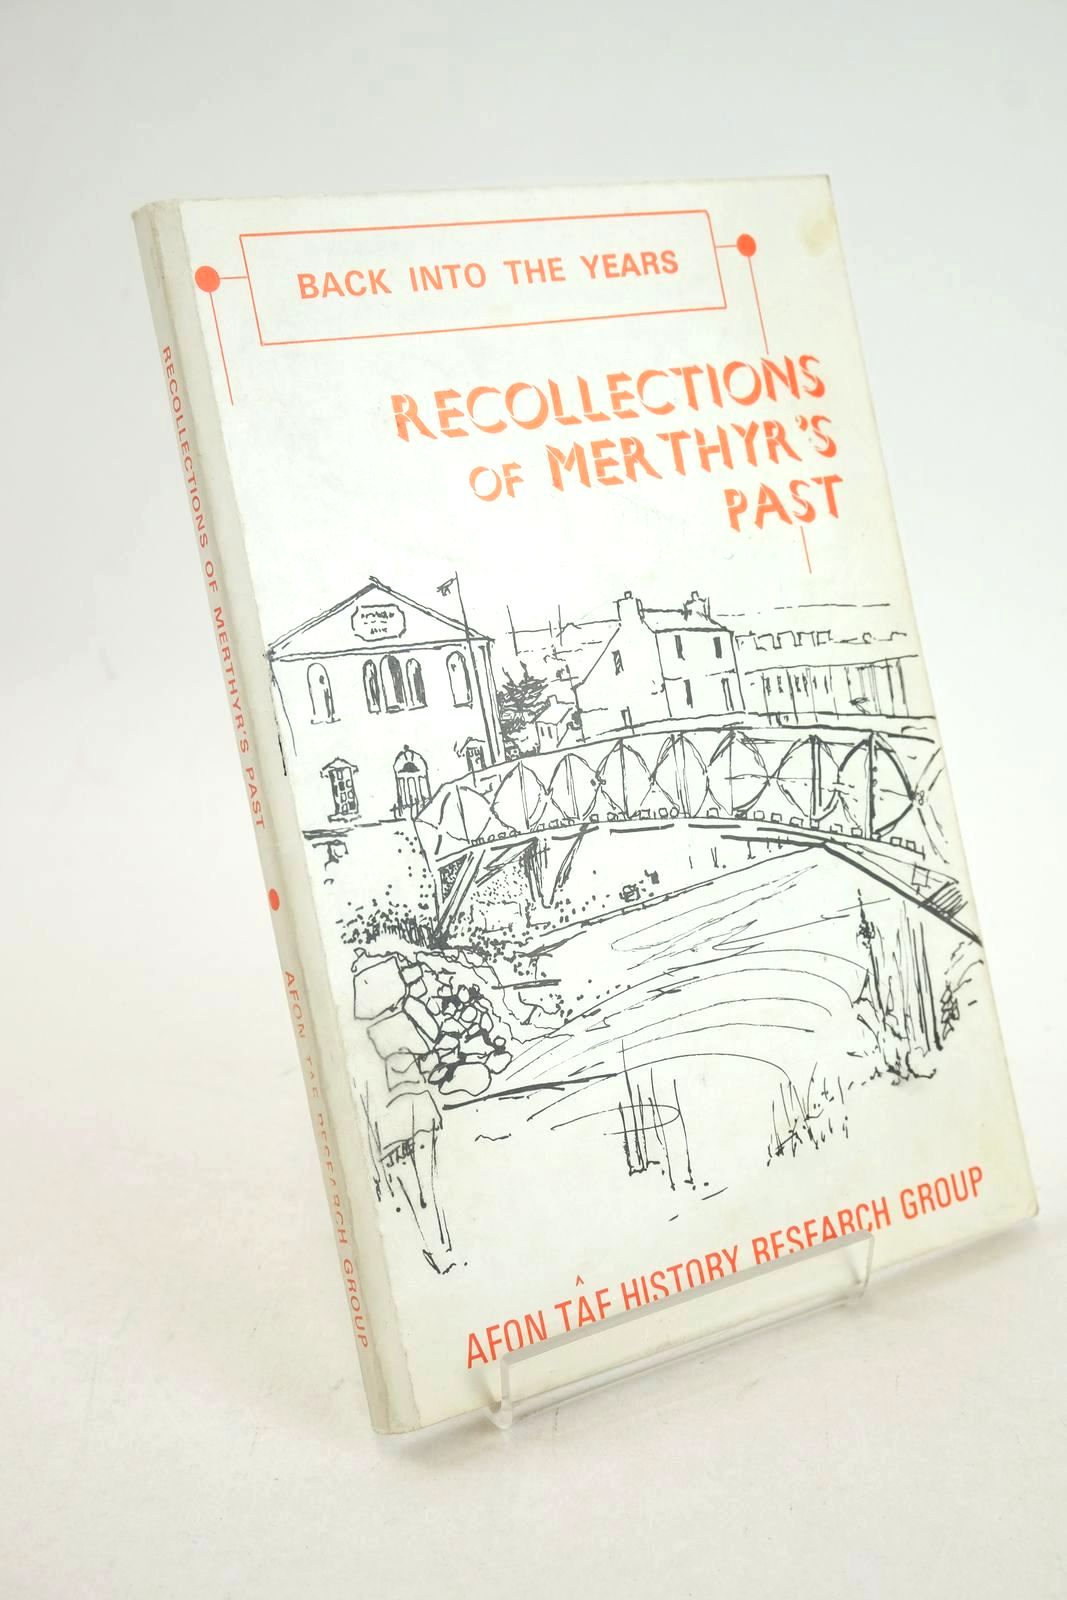 Photo of RECOLLECTIONS OF MERTHYR'S PAST: BACK INTO THE YEARS written by Vaughan, F. Edwards, Julie et al, published by Afon Taf History Research Group (STOCK CODE: 1326902)  for sale by Stella & Rose's Books